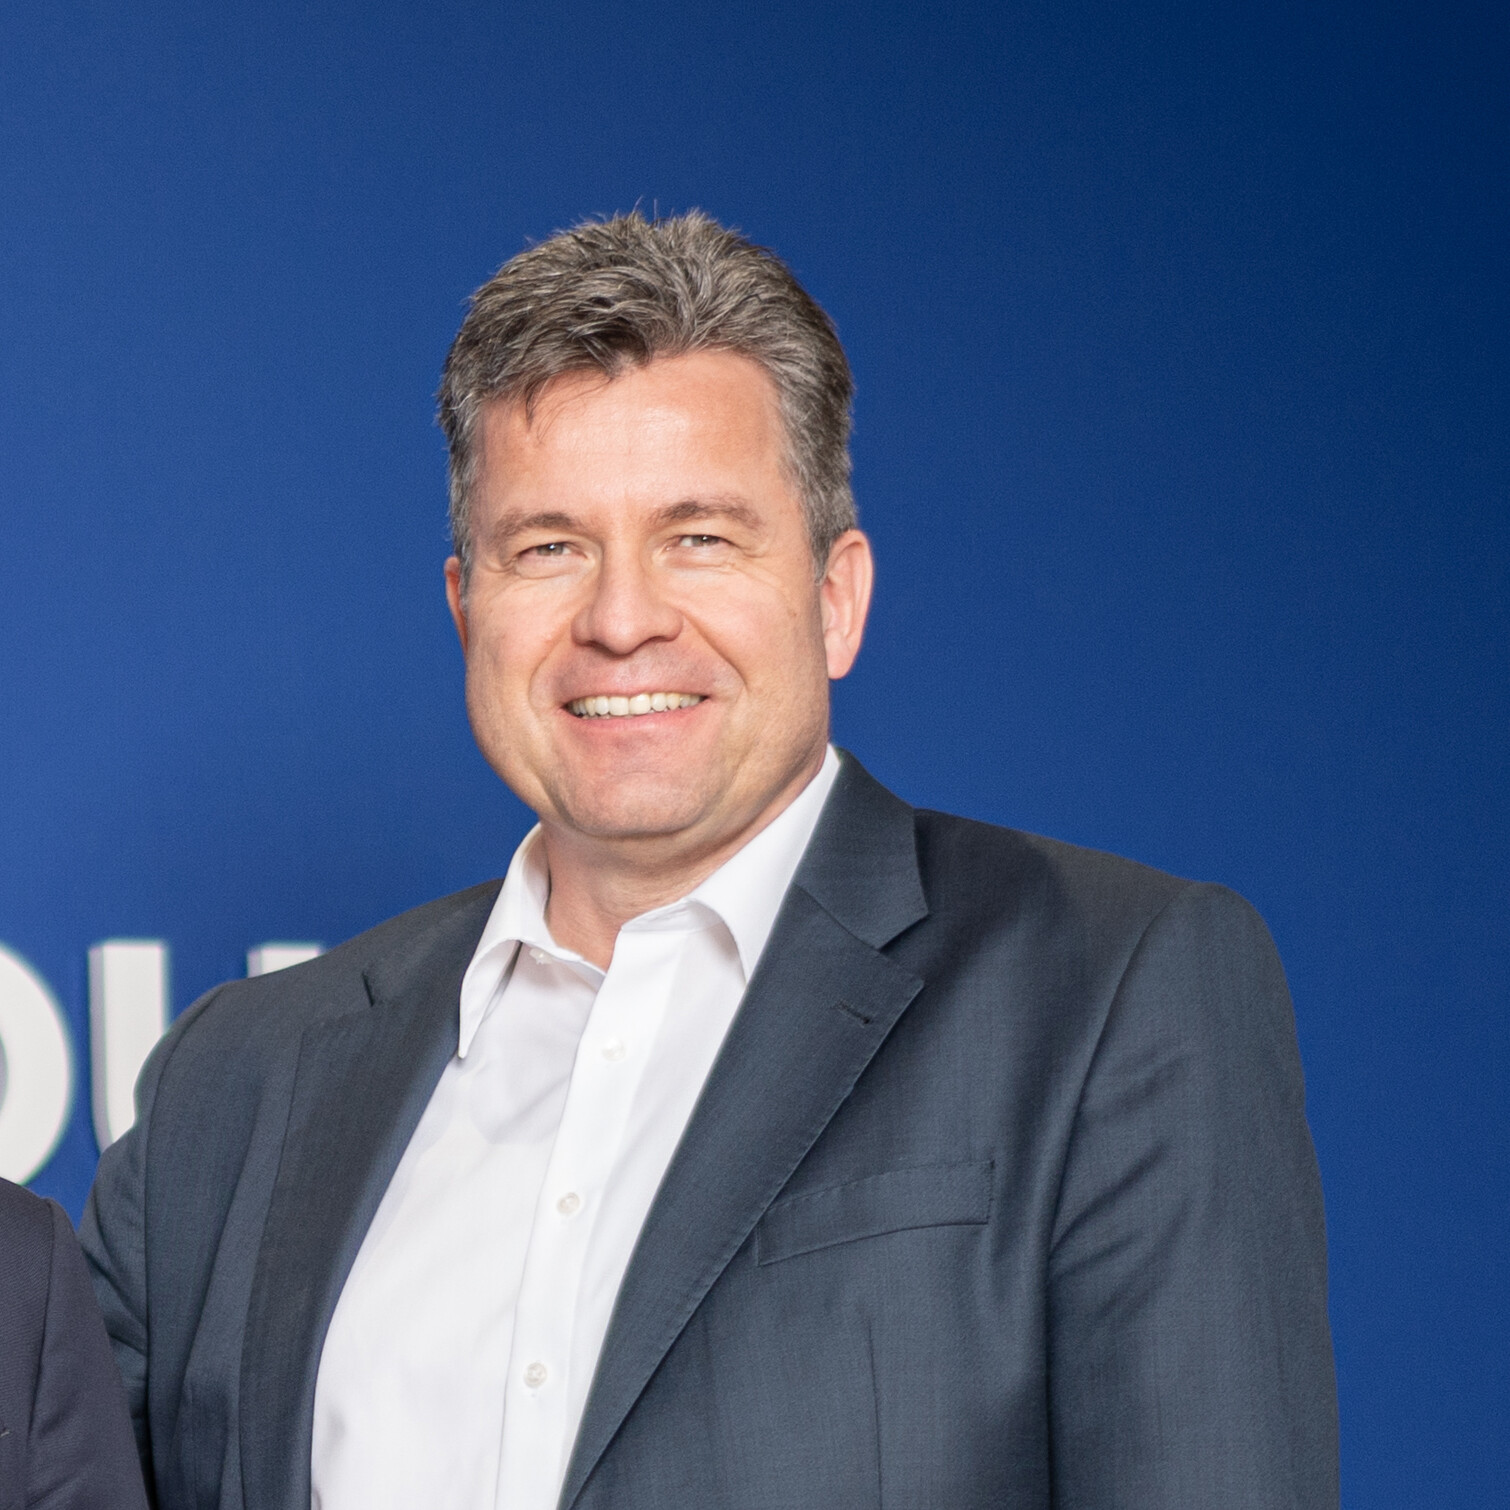 Portrait of the Executive Board of the Masterflex Group: Dr. Andreas Bastin and Mark Becks